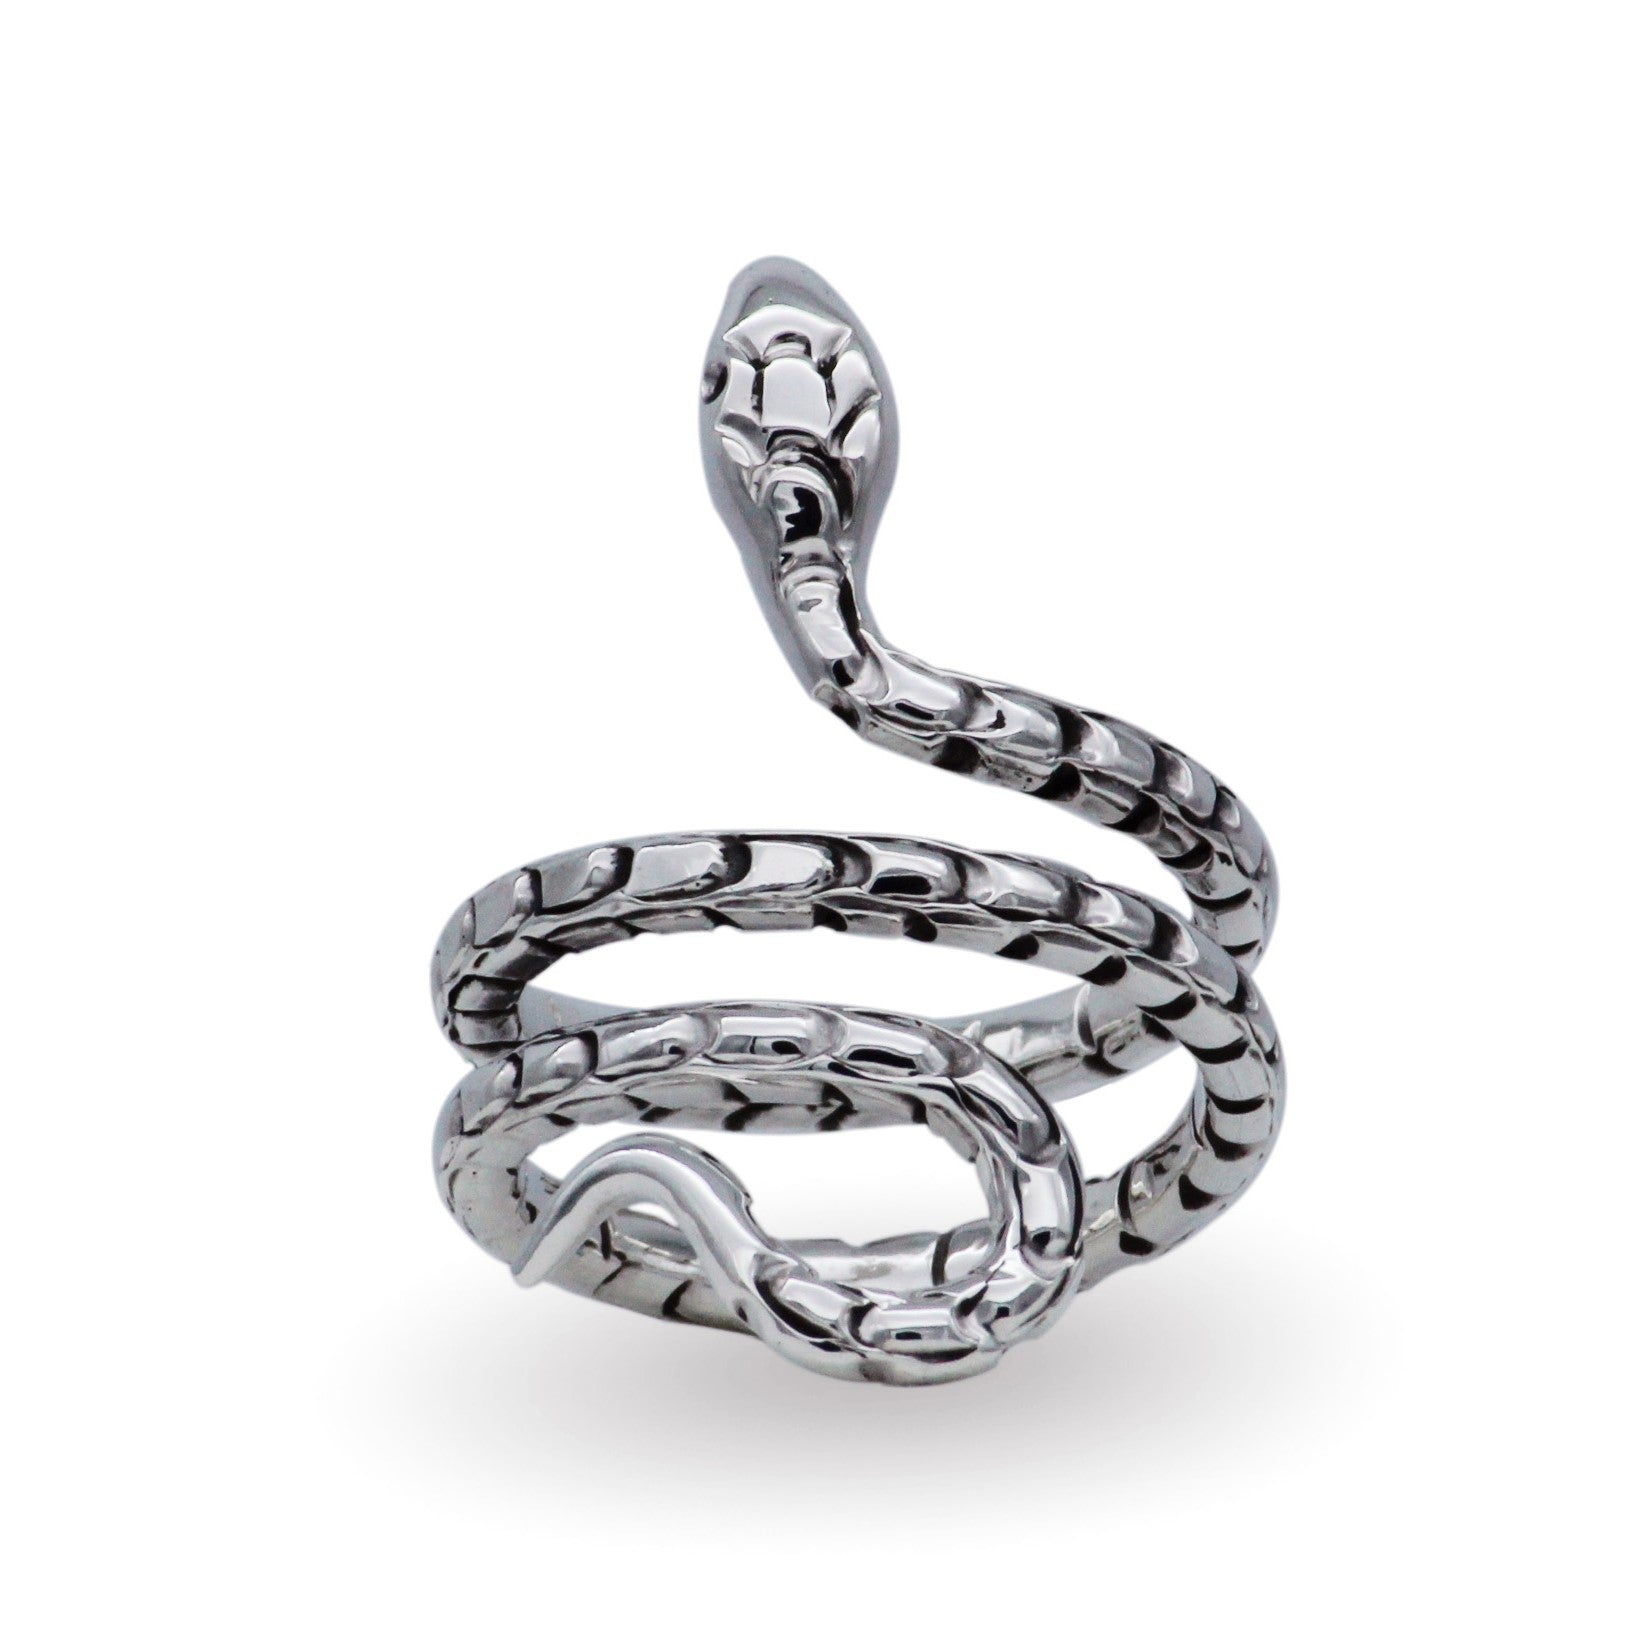 The Serpent Transformation Ring